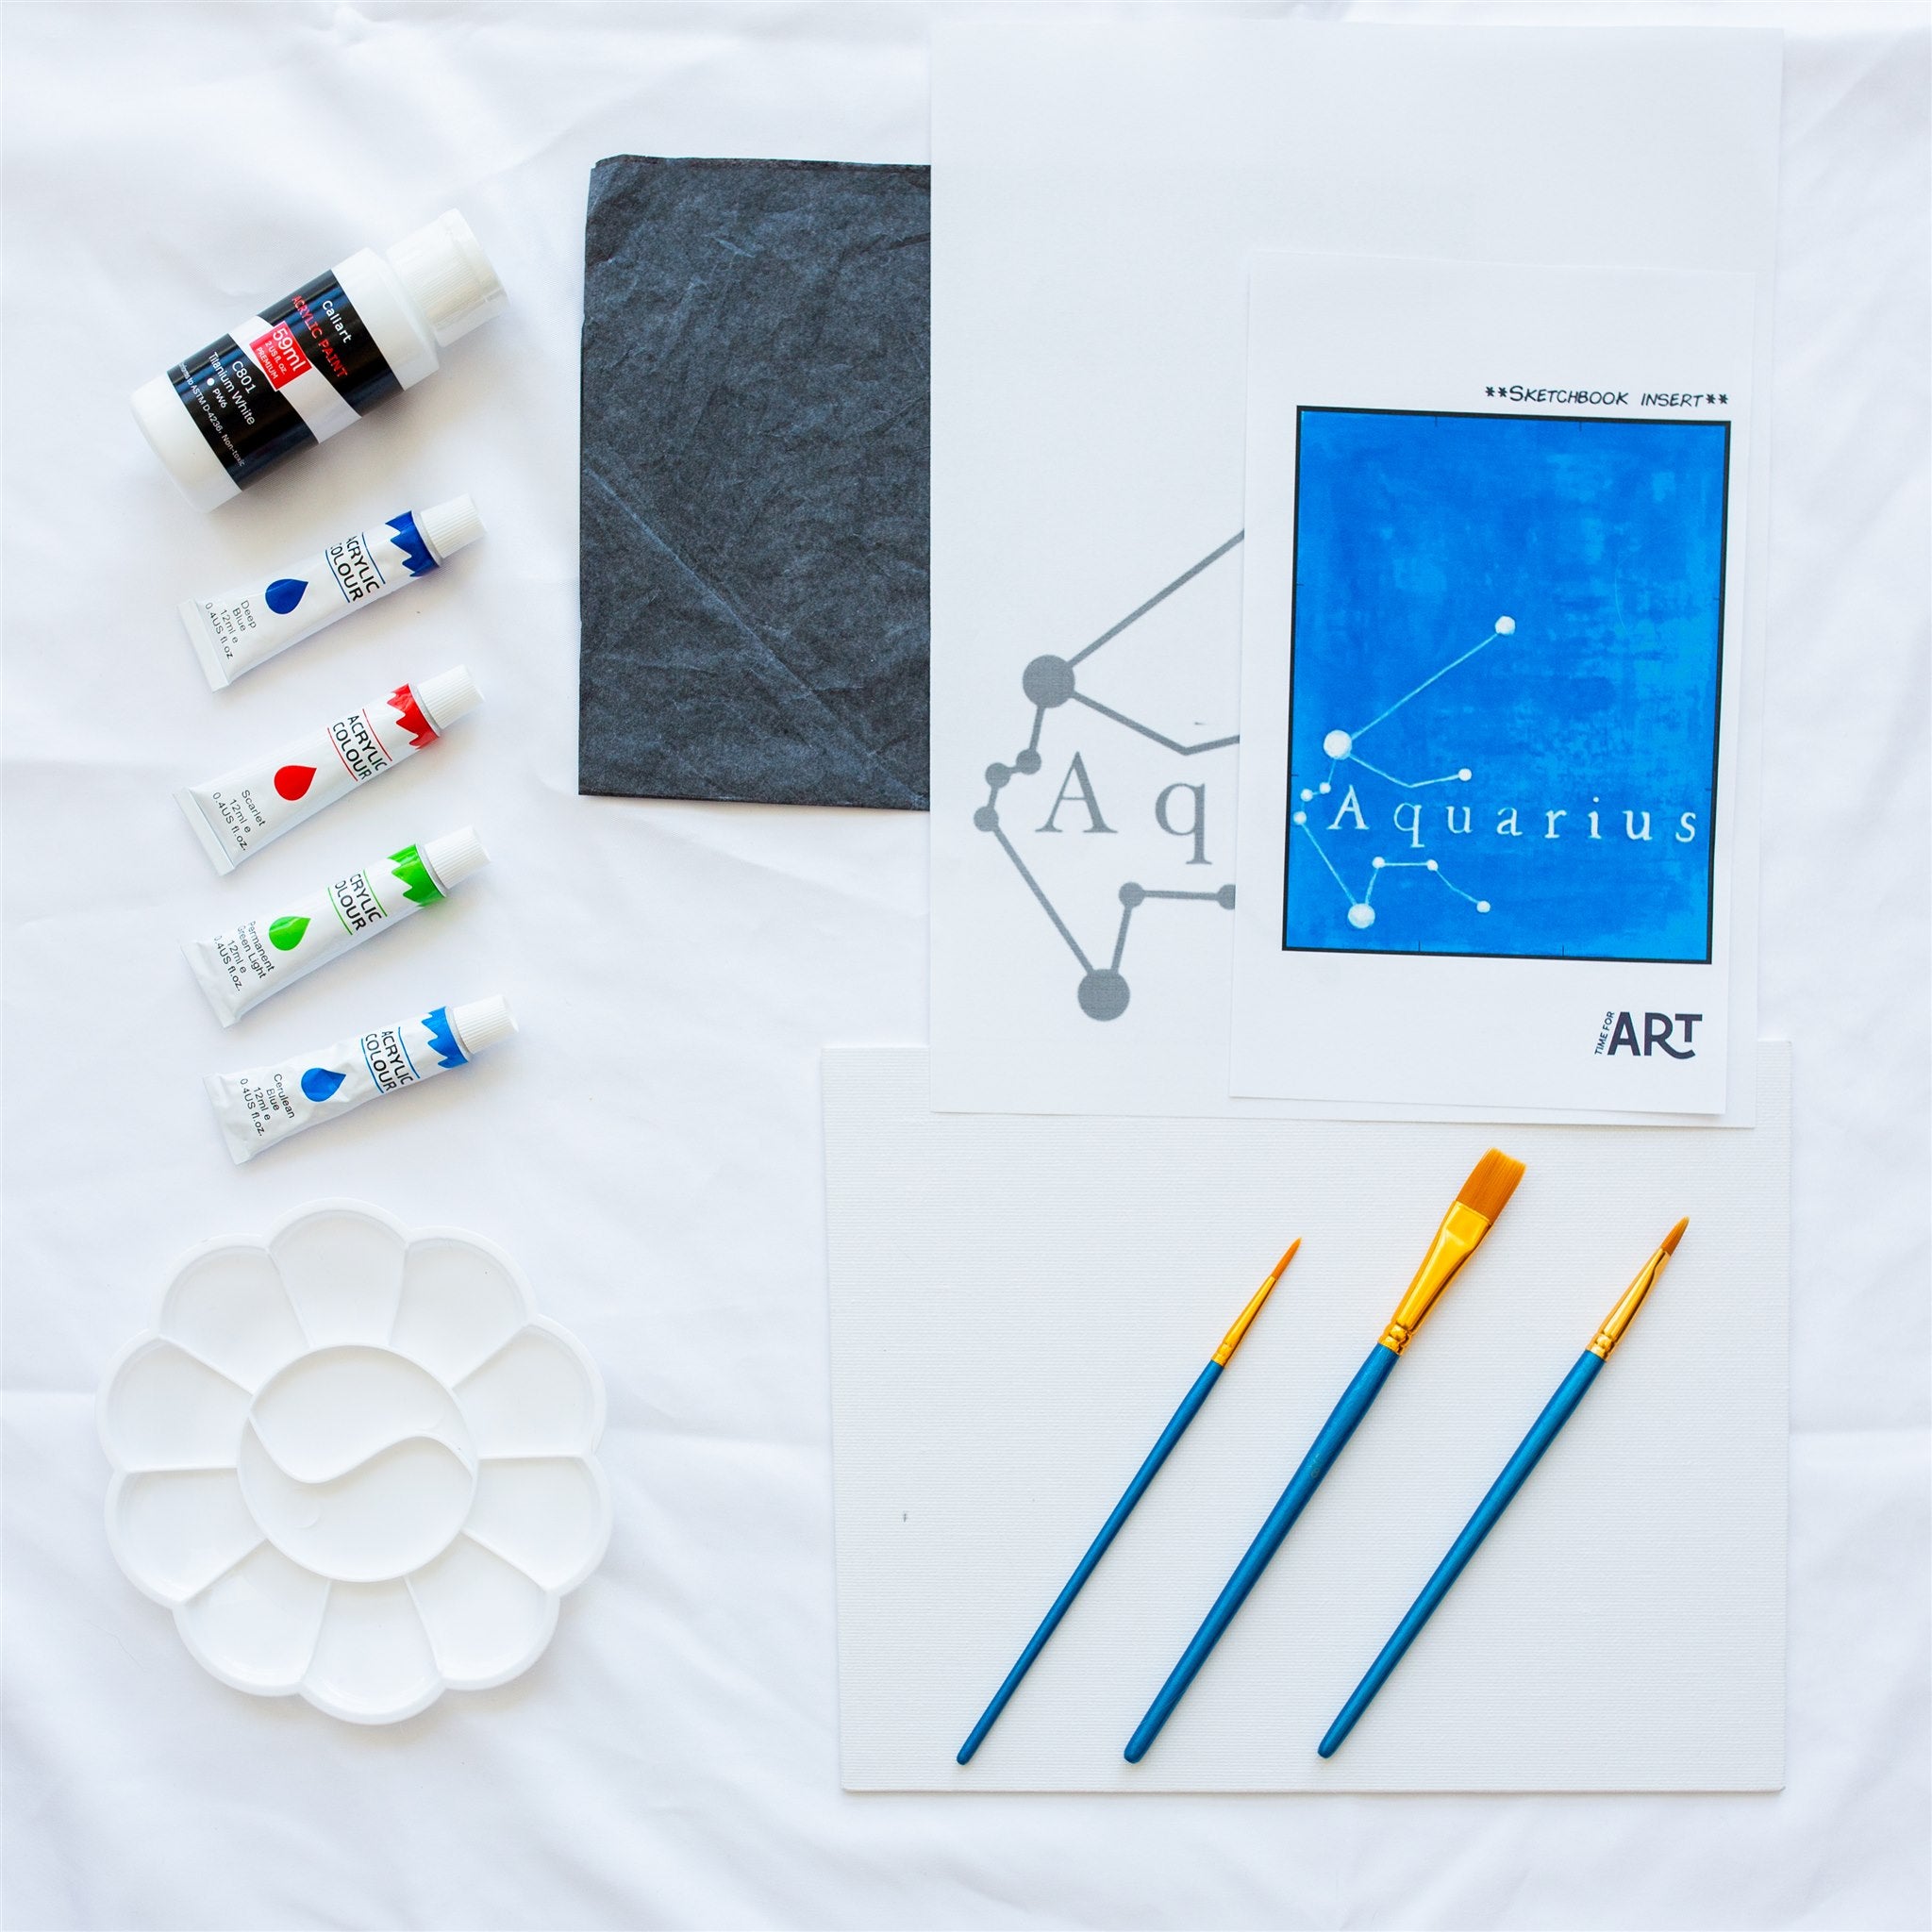 Whats included in the Aquarius Horoscope painting kit. 4 acrylic paints, painters pallet, brushes, canvas panel, traceable outline, and reference image.